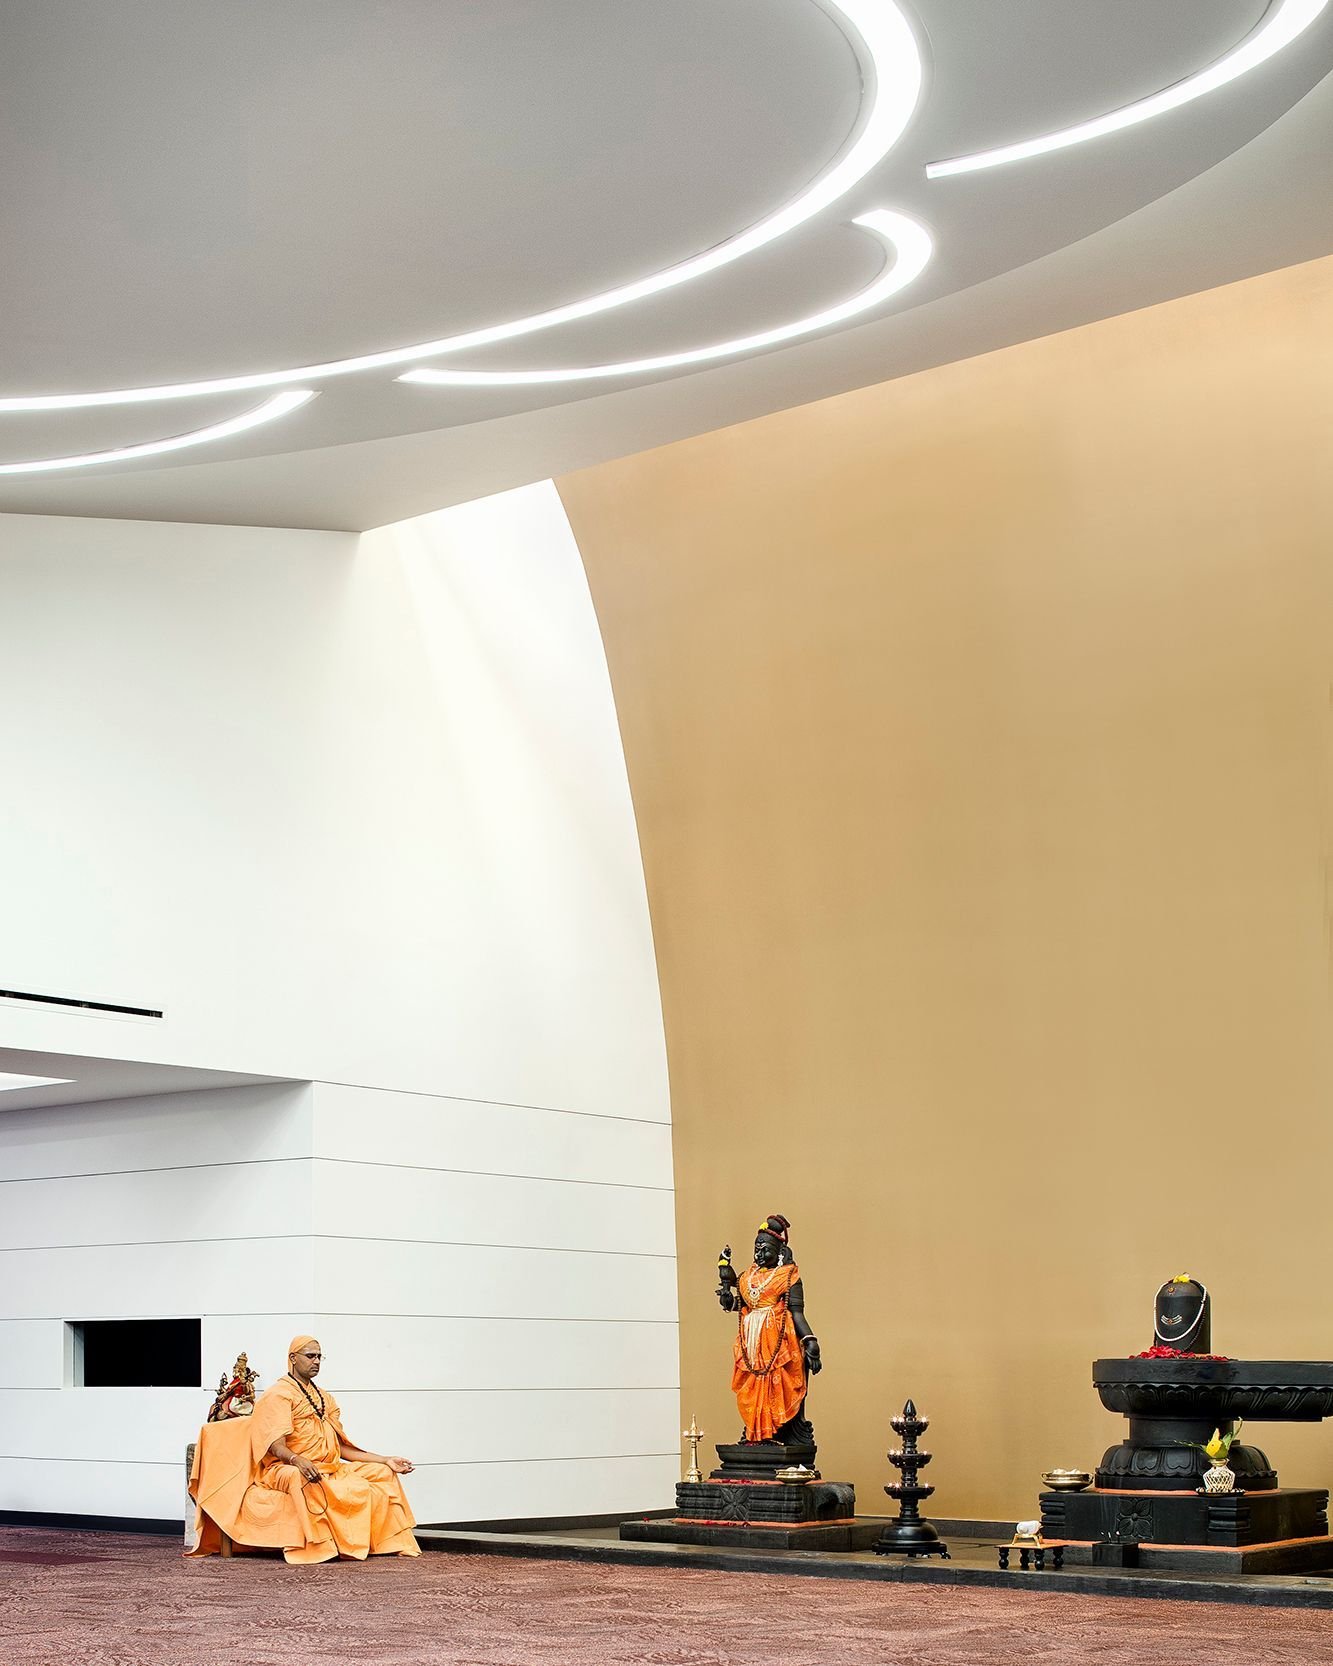 Above the shrine, the most sacred space in the temple, light from concealed skylights is reflected by a golden wall, creating an aura around three deities arrayed with bright robes and flowers. #ChinmayaMissionAustin #MiroRiveraArchitects #MRAProject